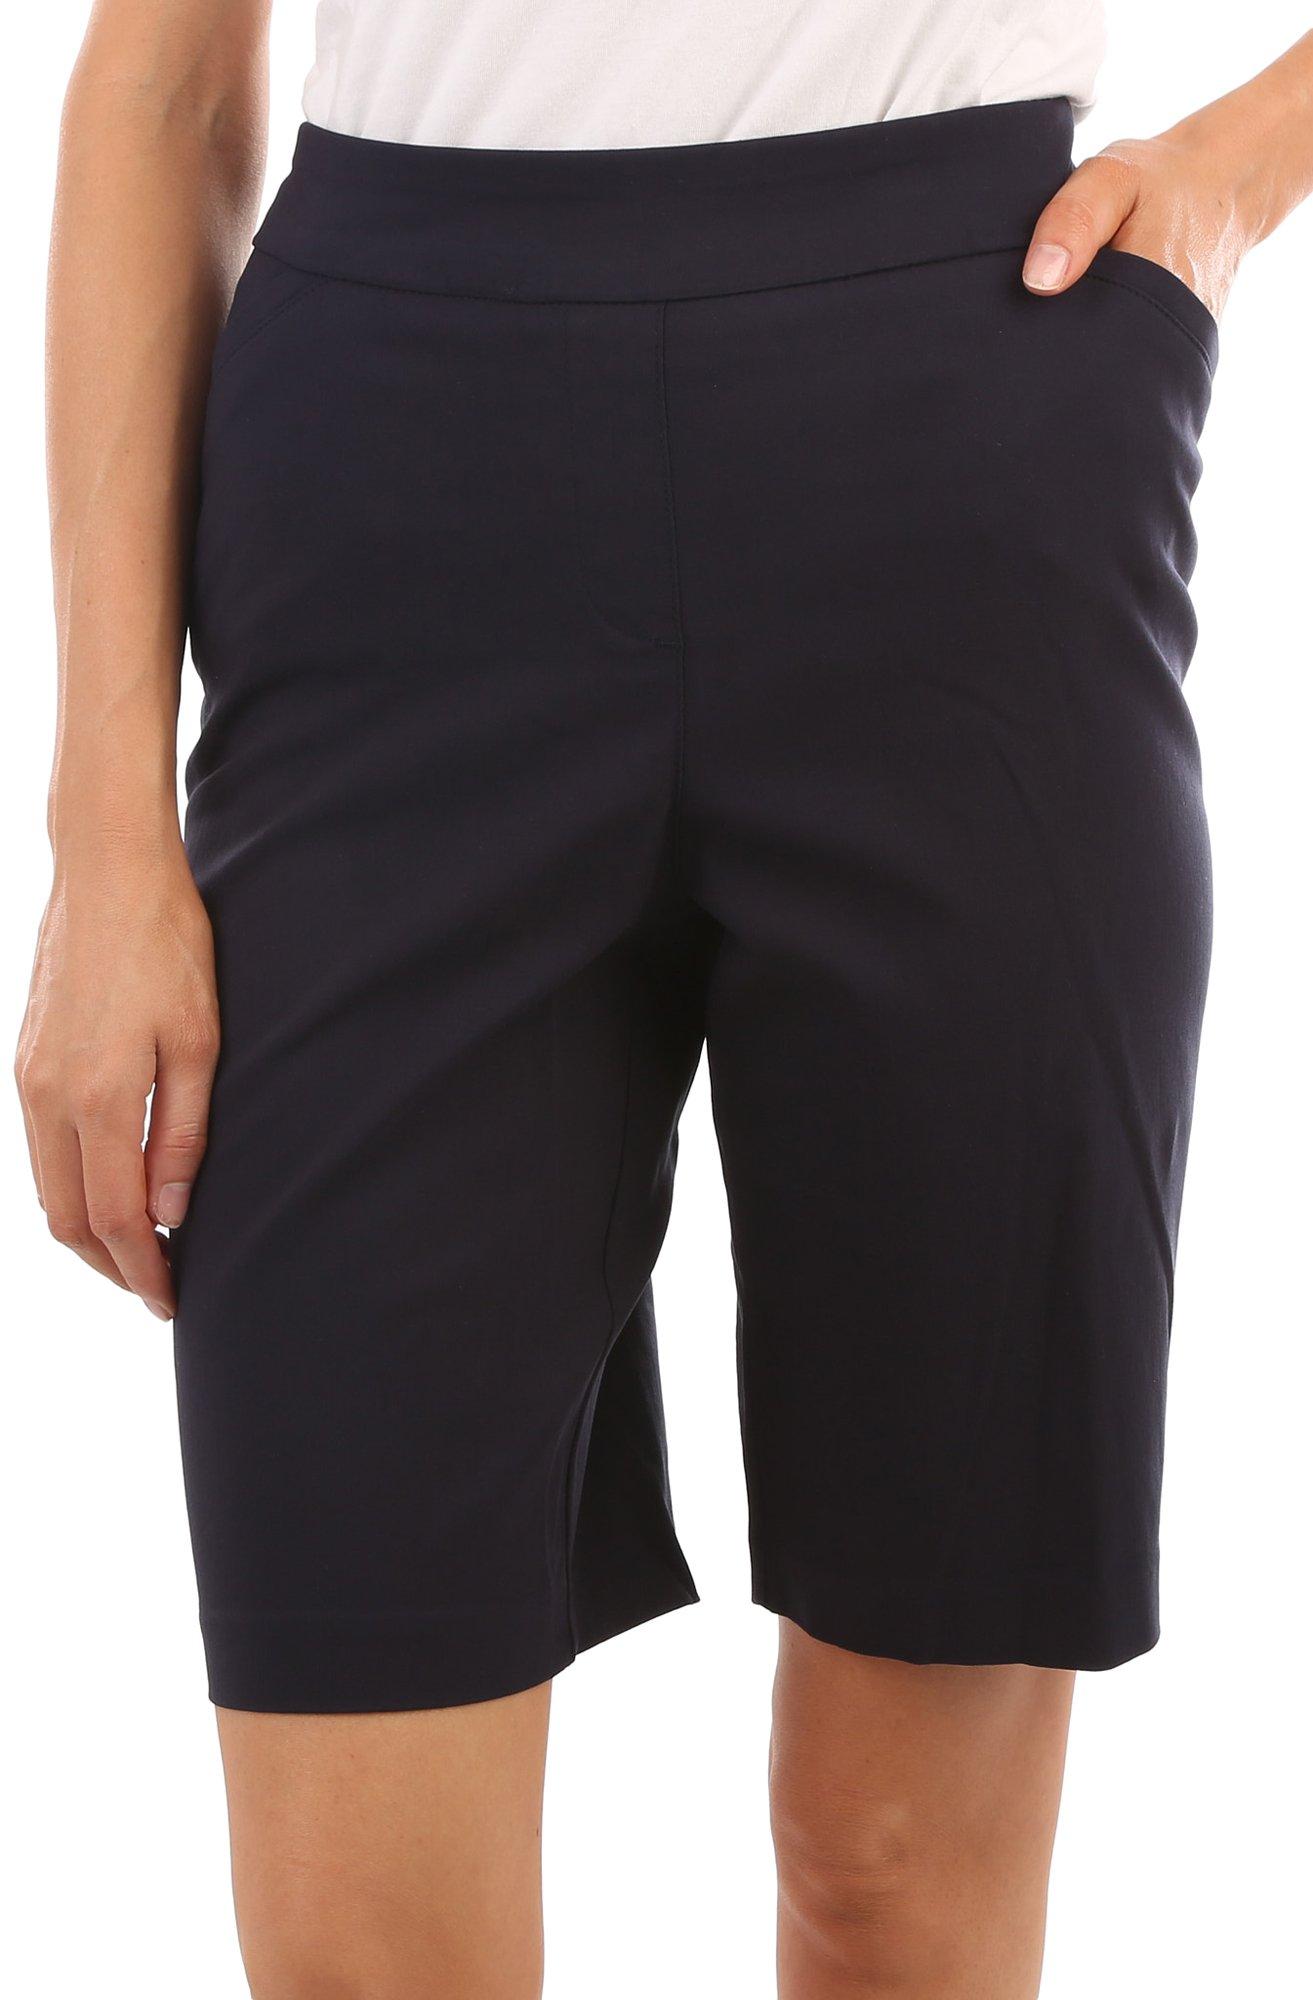 Supplies by Union Bay Womens Alix Twill Shorts